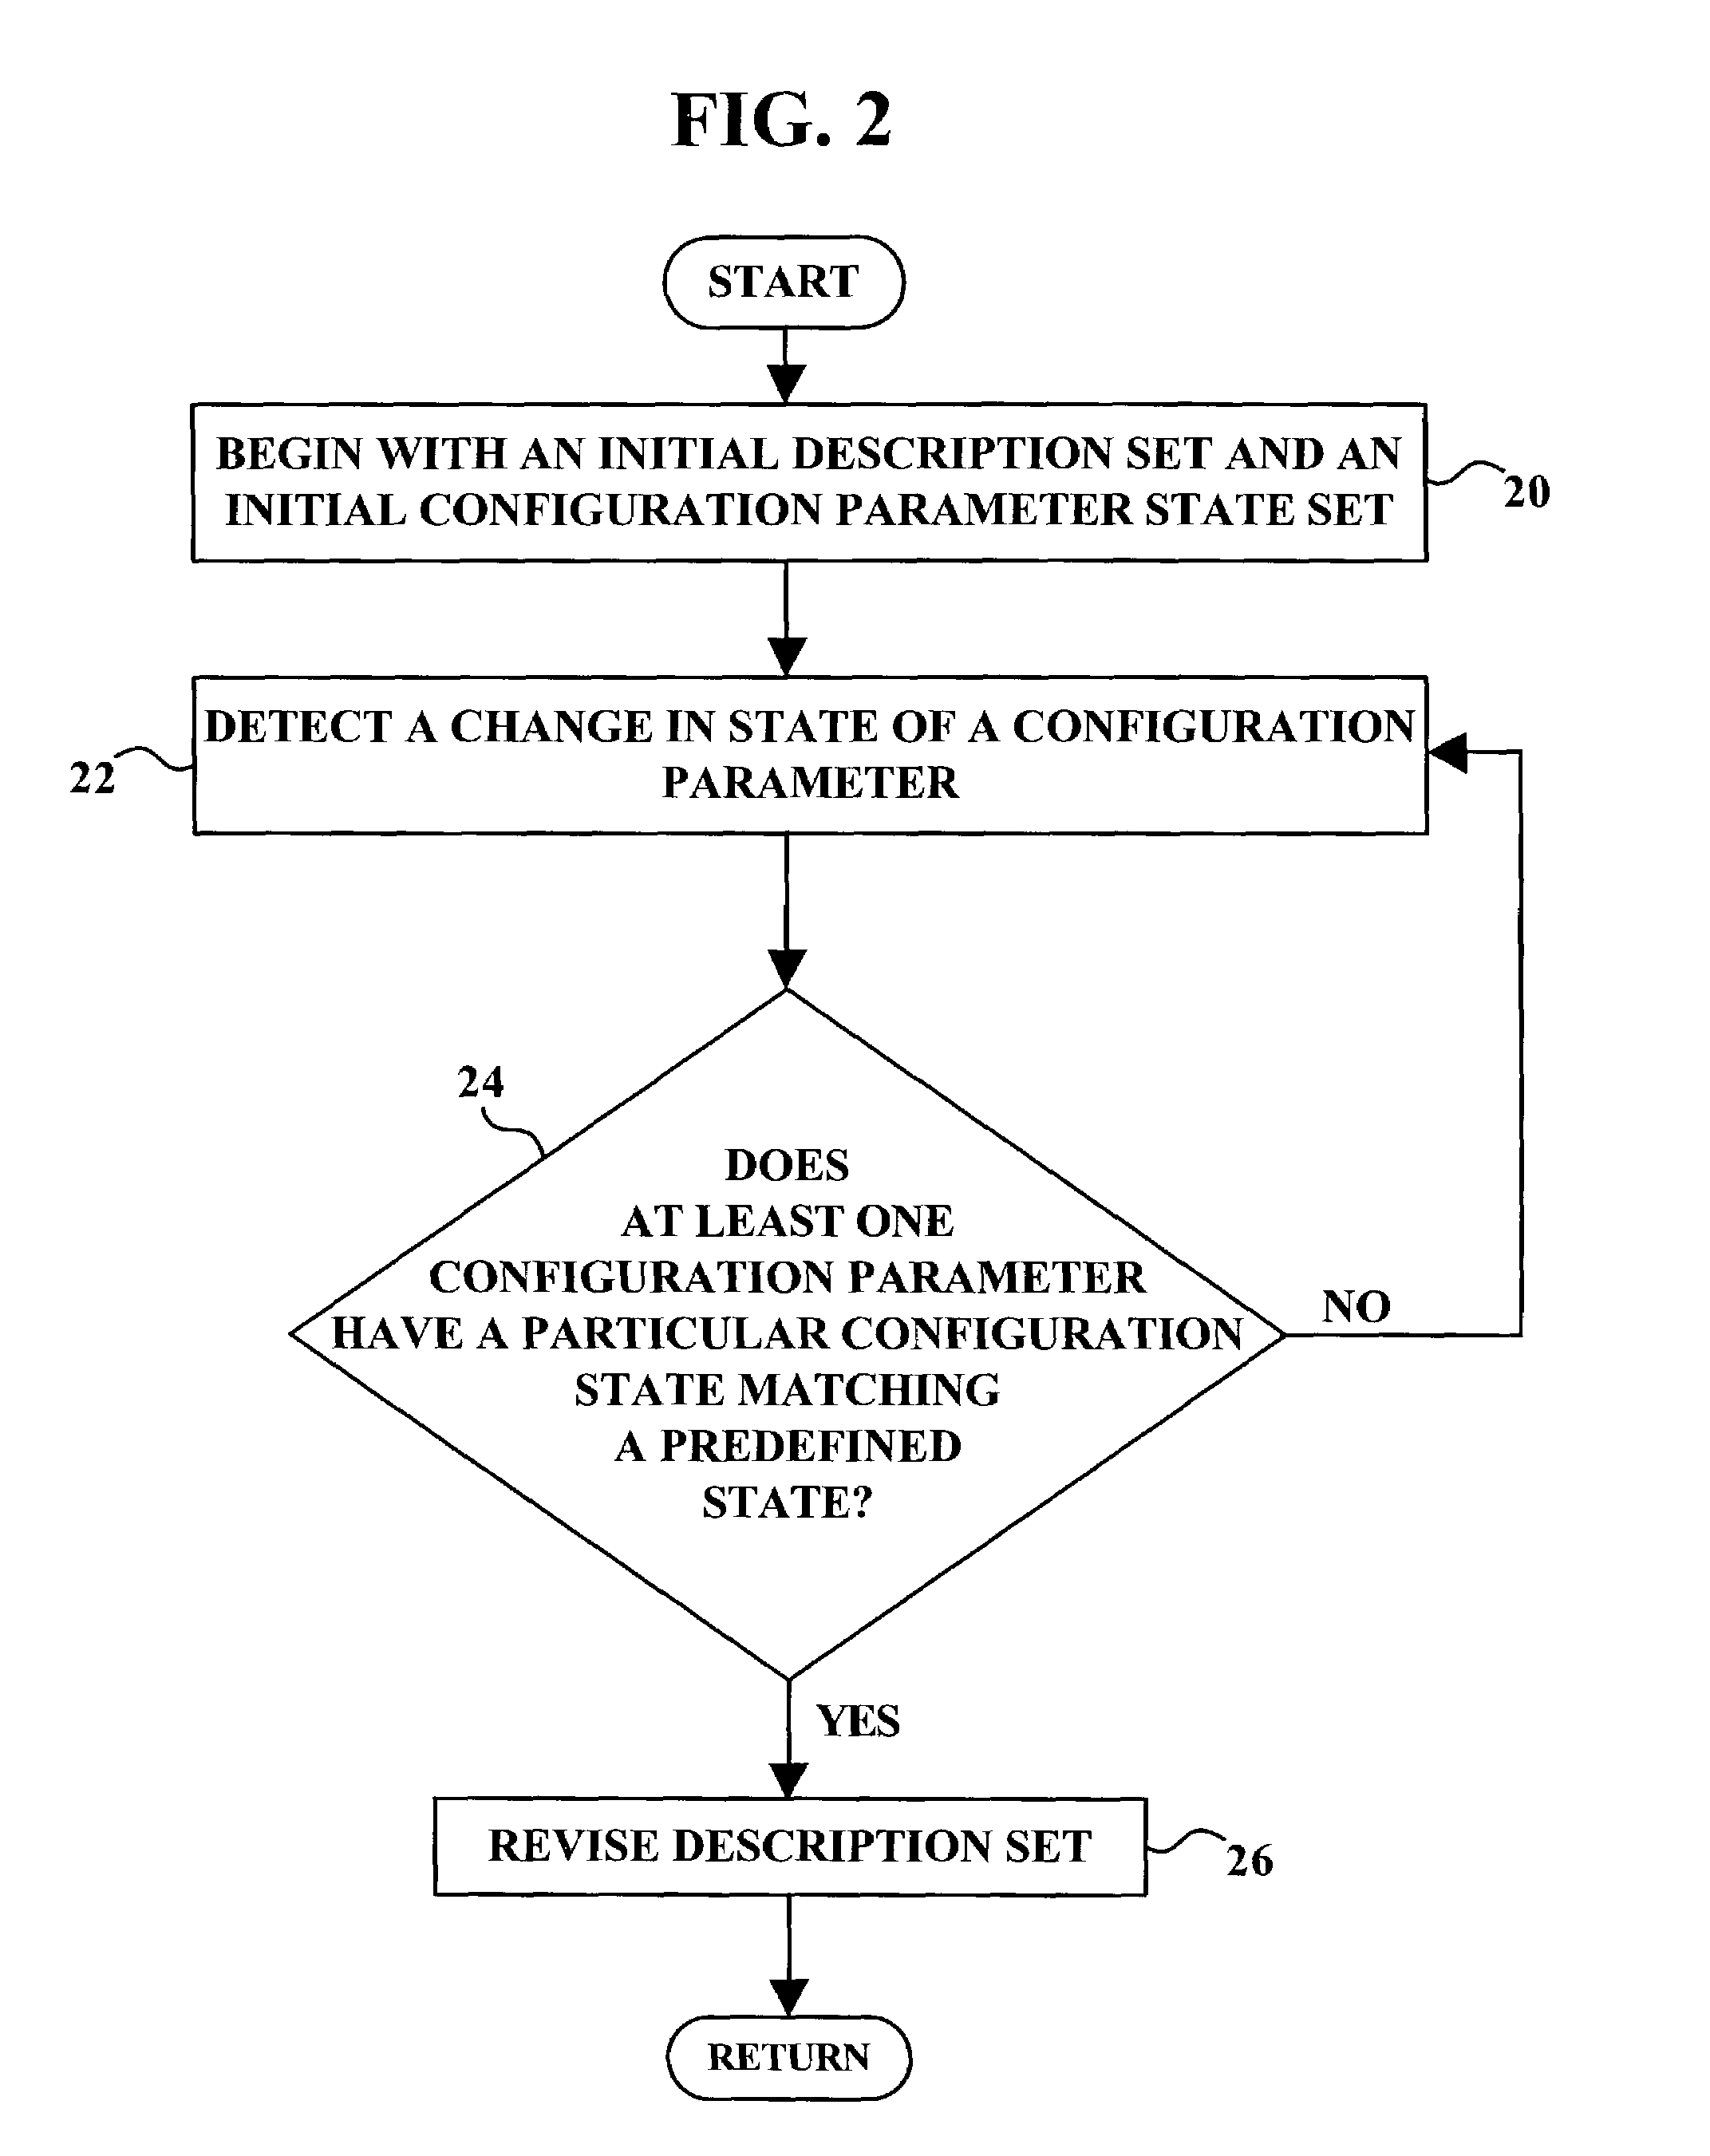 Method and system for automatically revising software help documentation